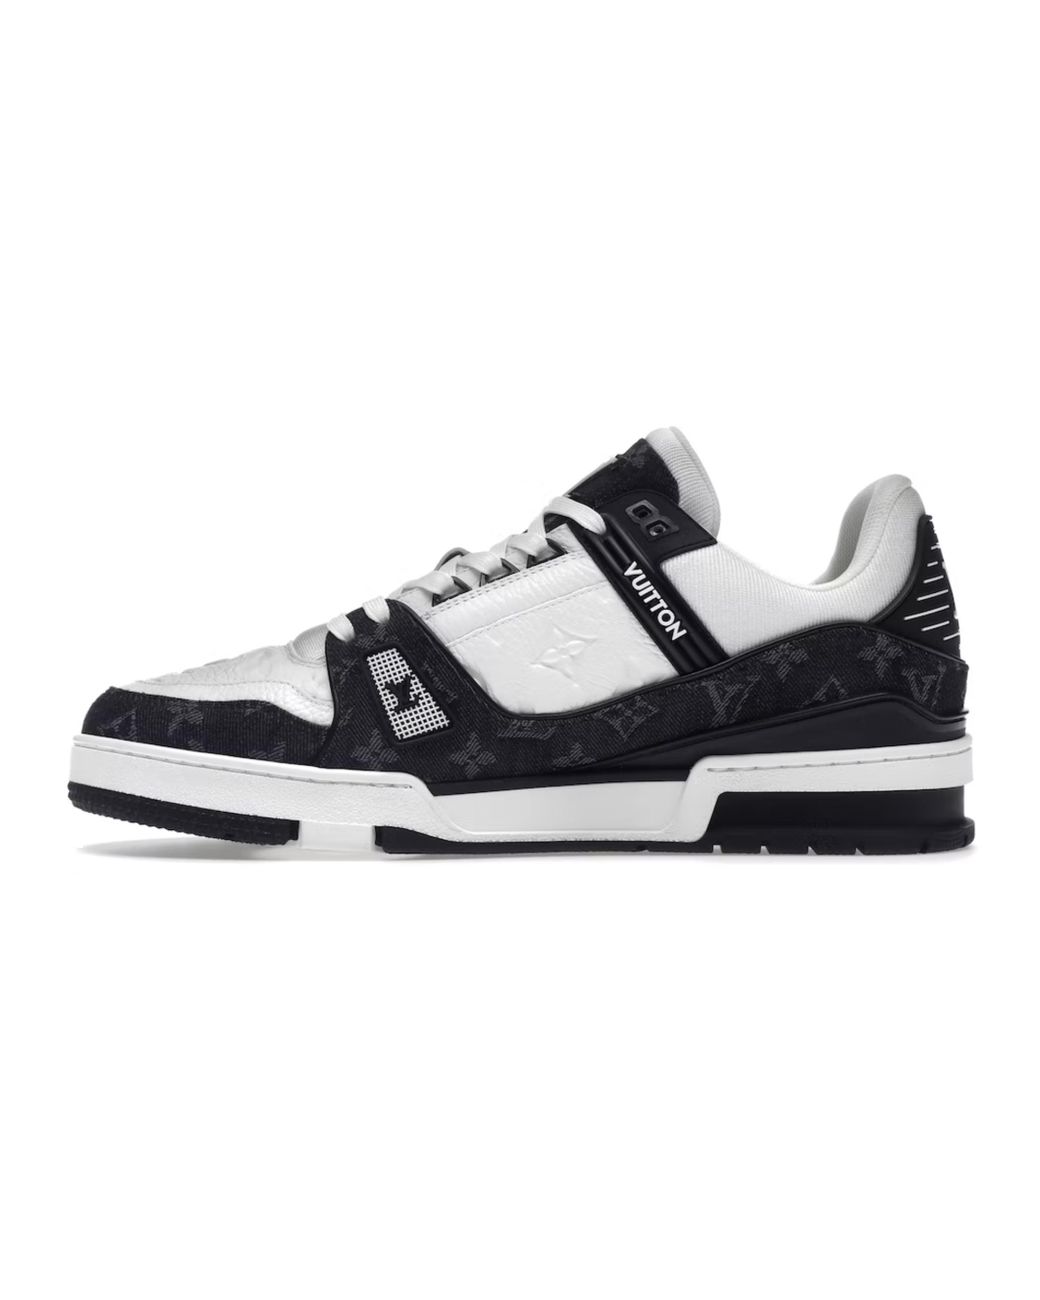 Louis Vuitton LV 408 Trainer in Black and White  Hypebeast